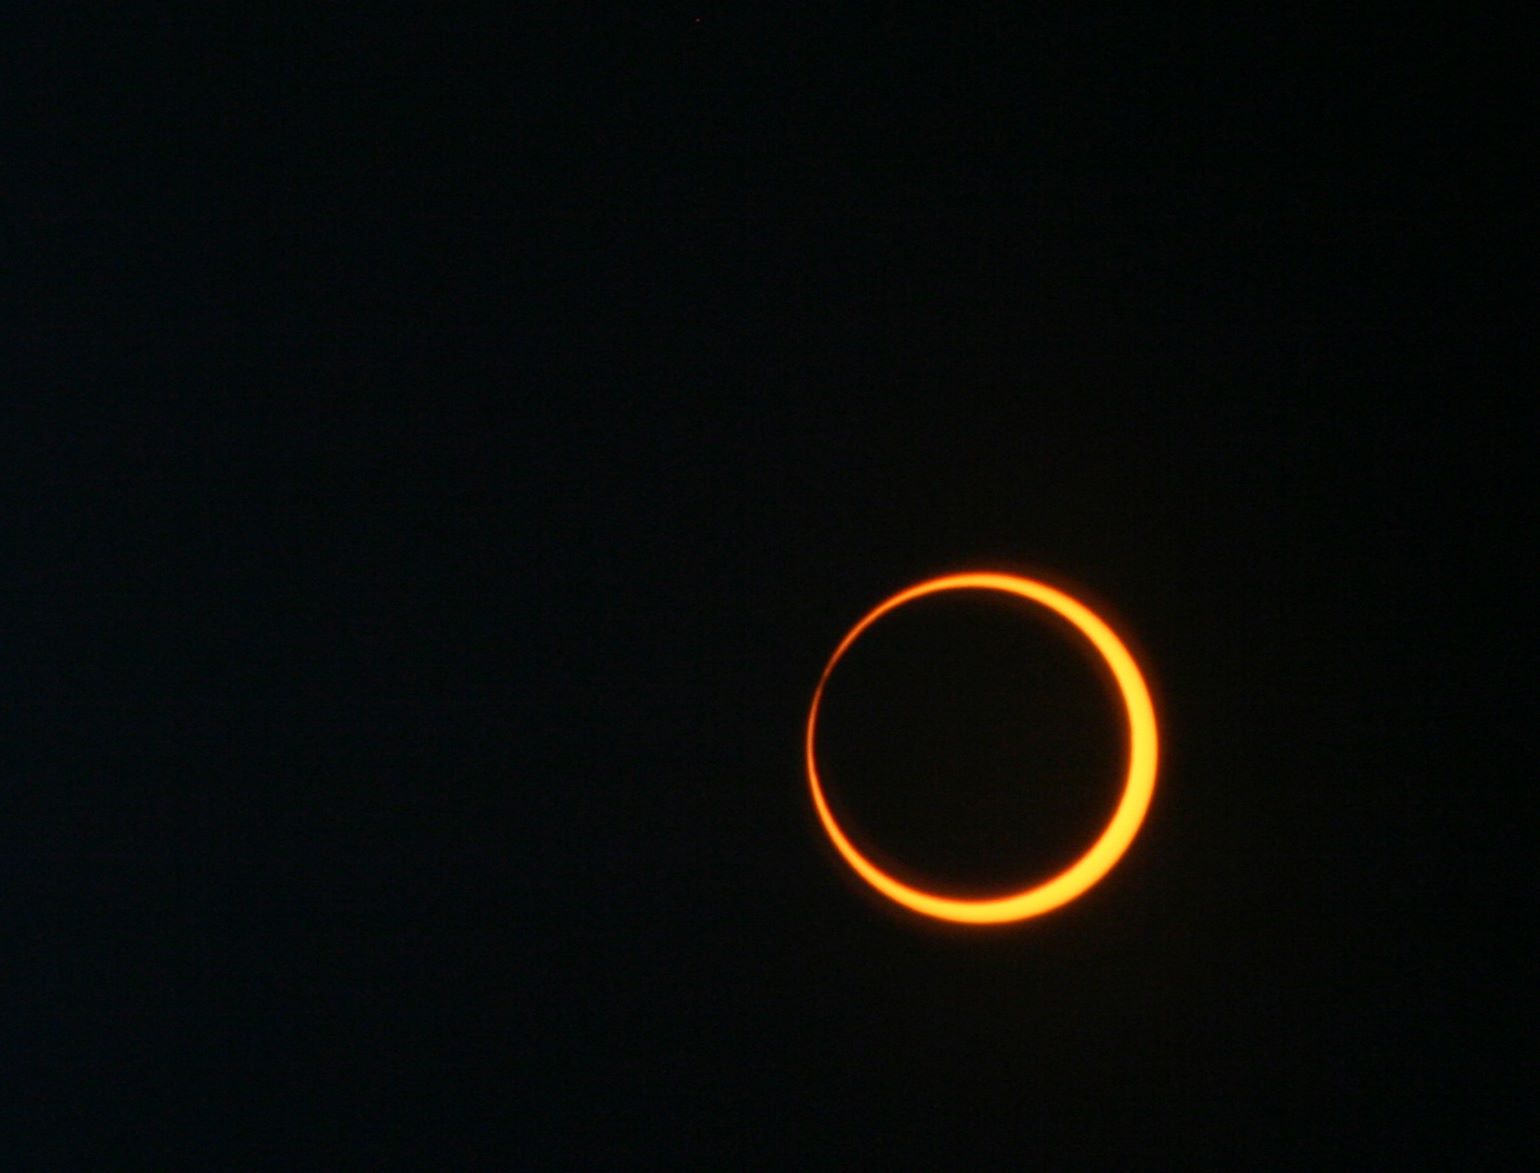 A ring of the sun is visible around a black background.  The rest of our star has been blocked out by the moon. This type of eclipse is called an annular eclipse.